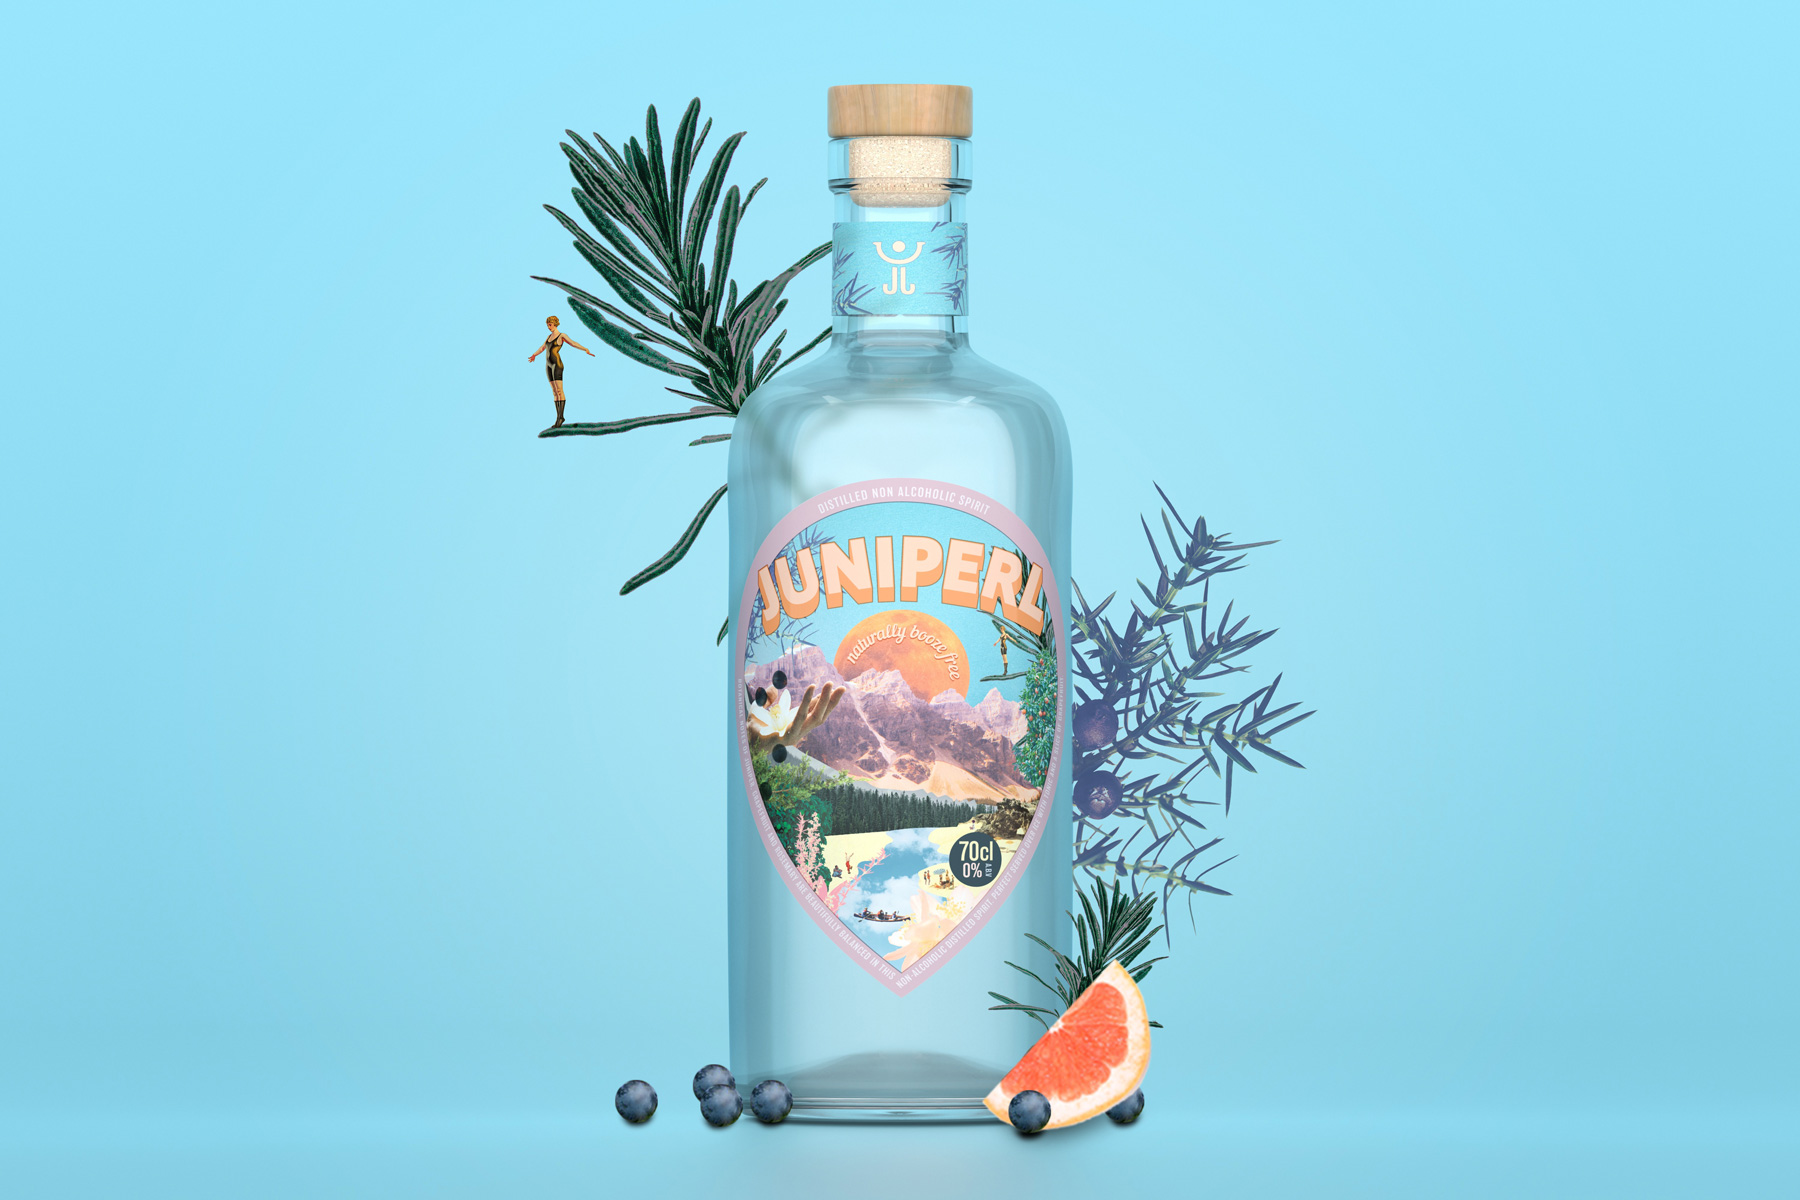 CGI product photography for an alcohol free gin brand